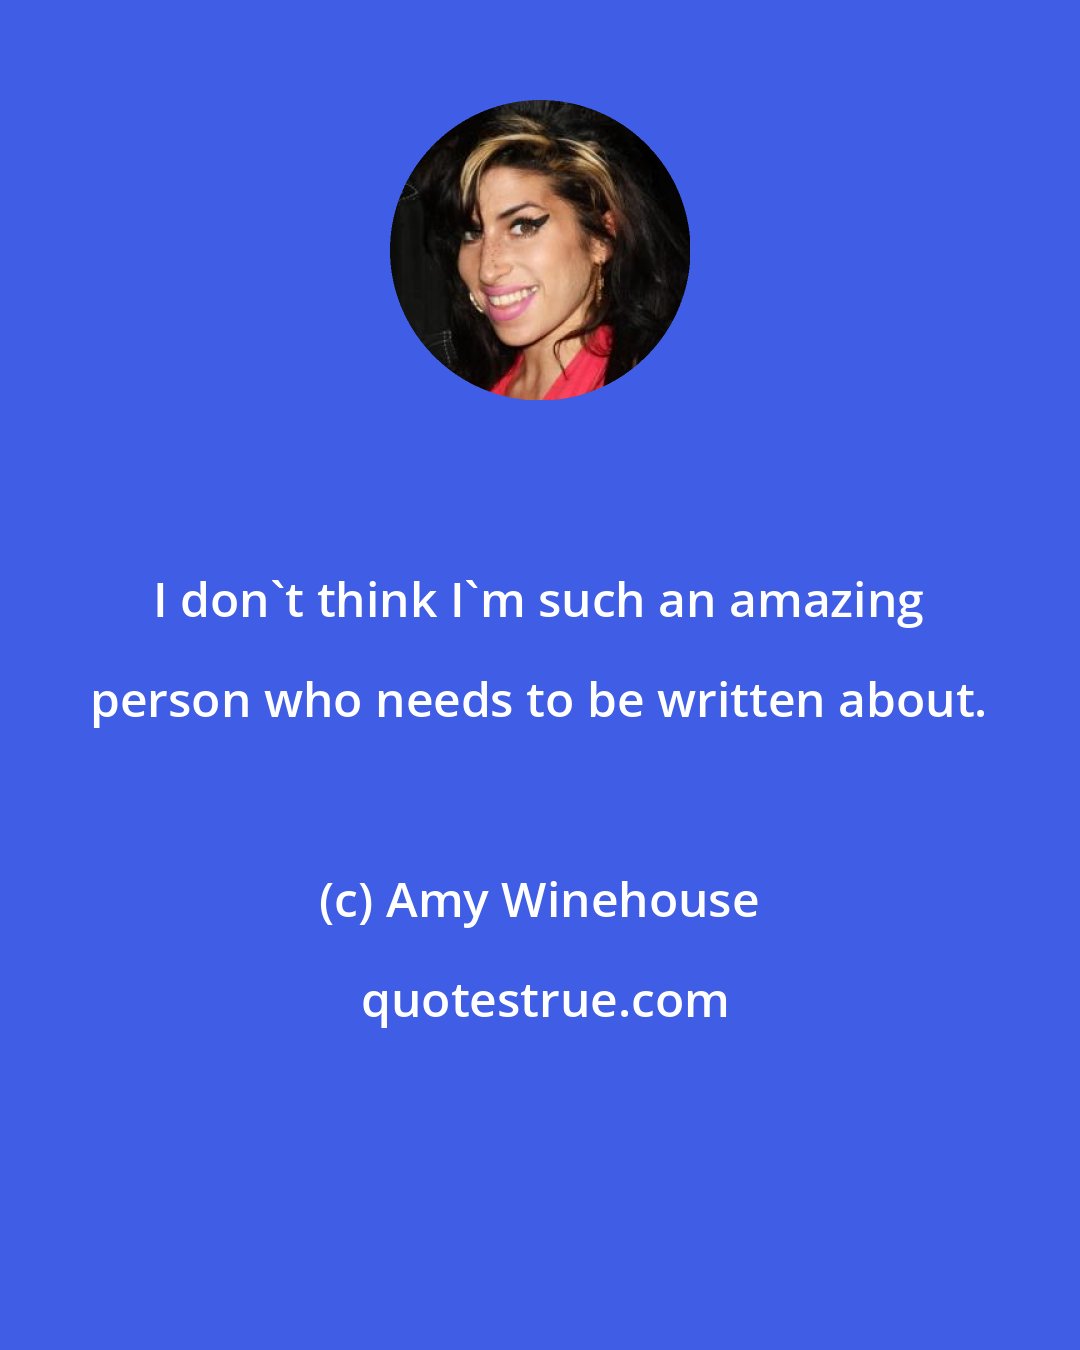 Amy Winehouse: I don't think I'm such an amazing person who needs to be written about.